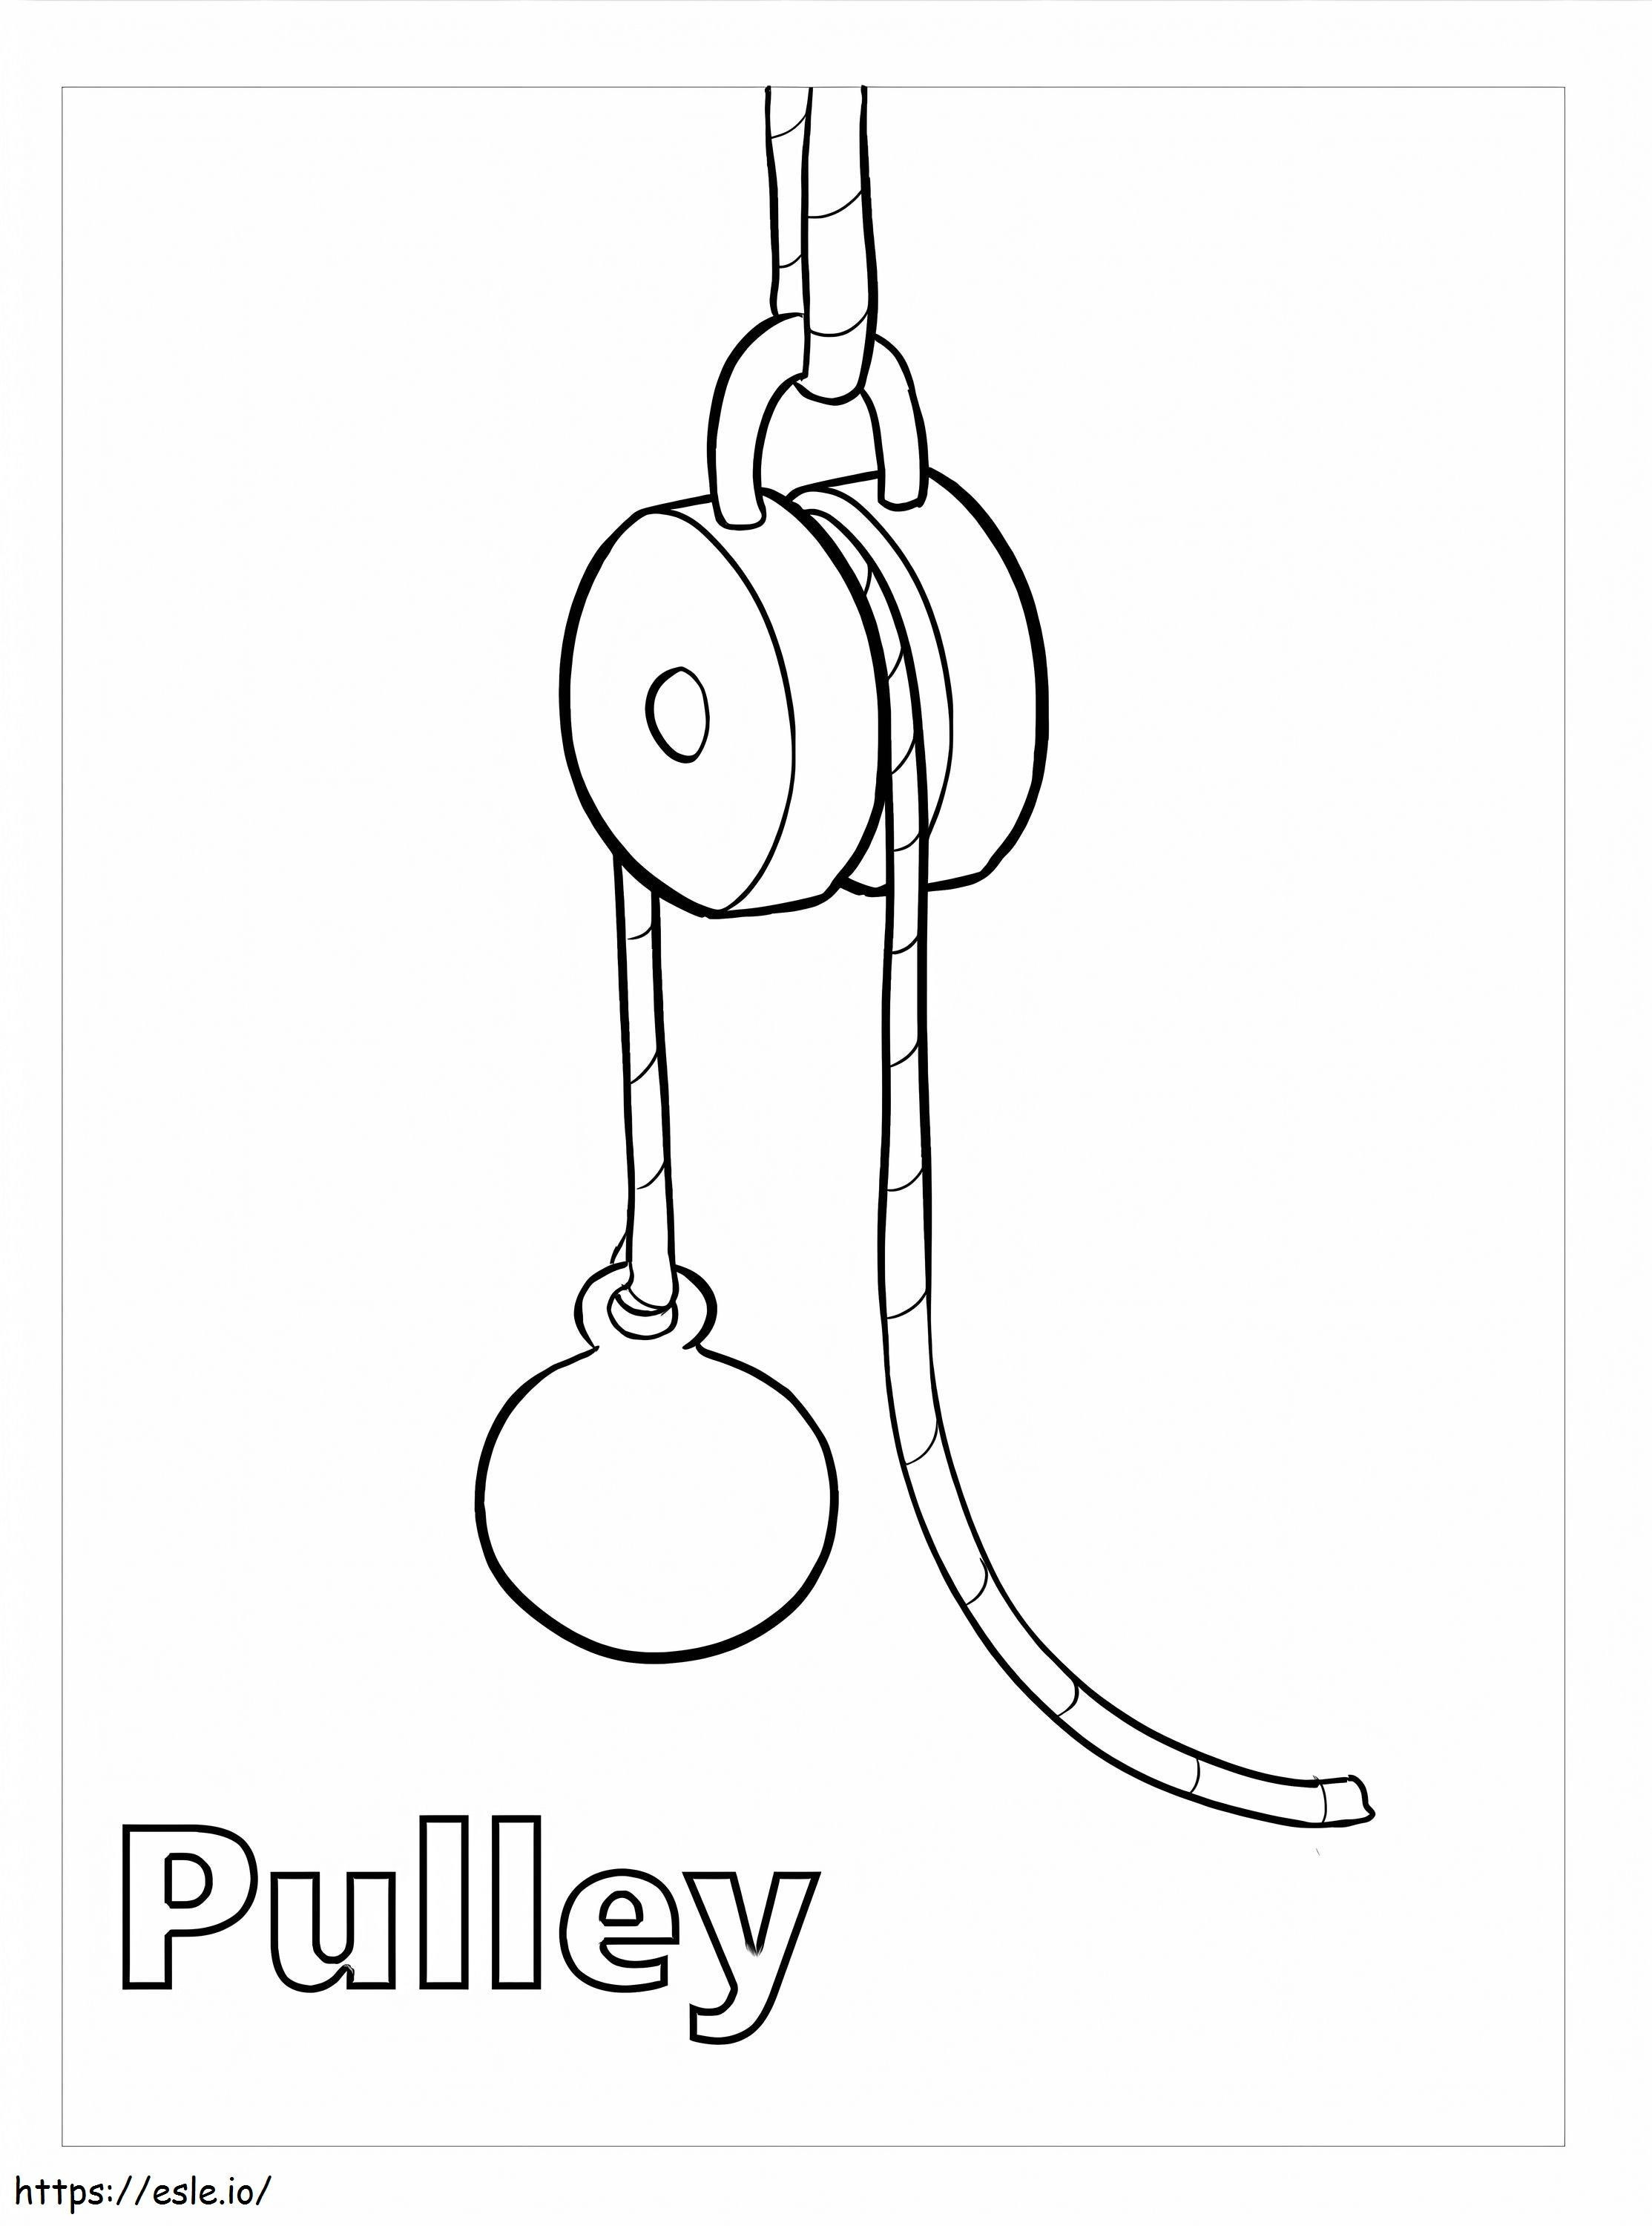 Pulley Machine coloring page